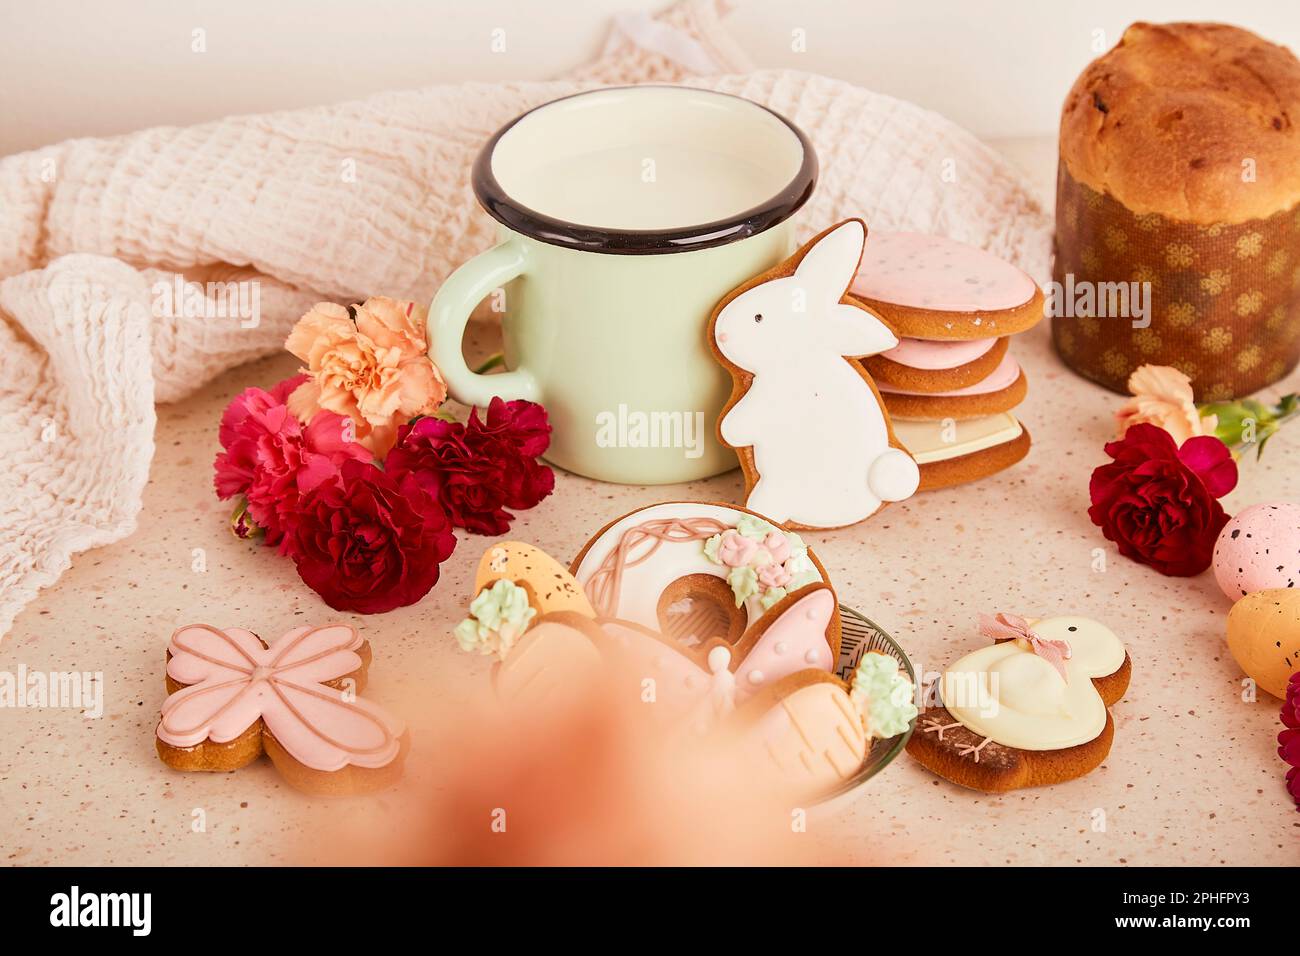 Aesthetic cozy Easter table with milk mug with glazed cookies, Cake and flowers. Springtime holiday floral background Stock Photo